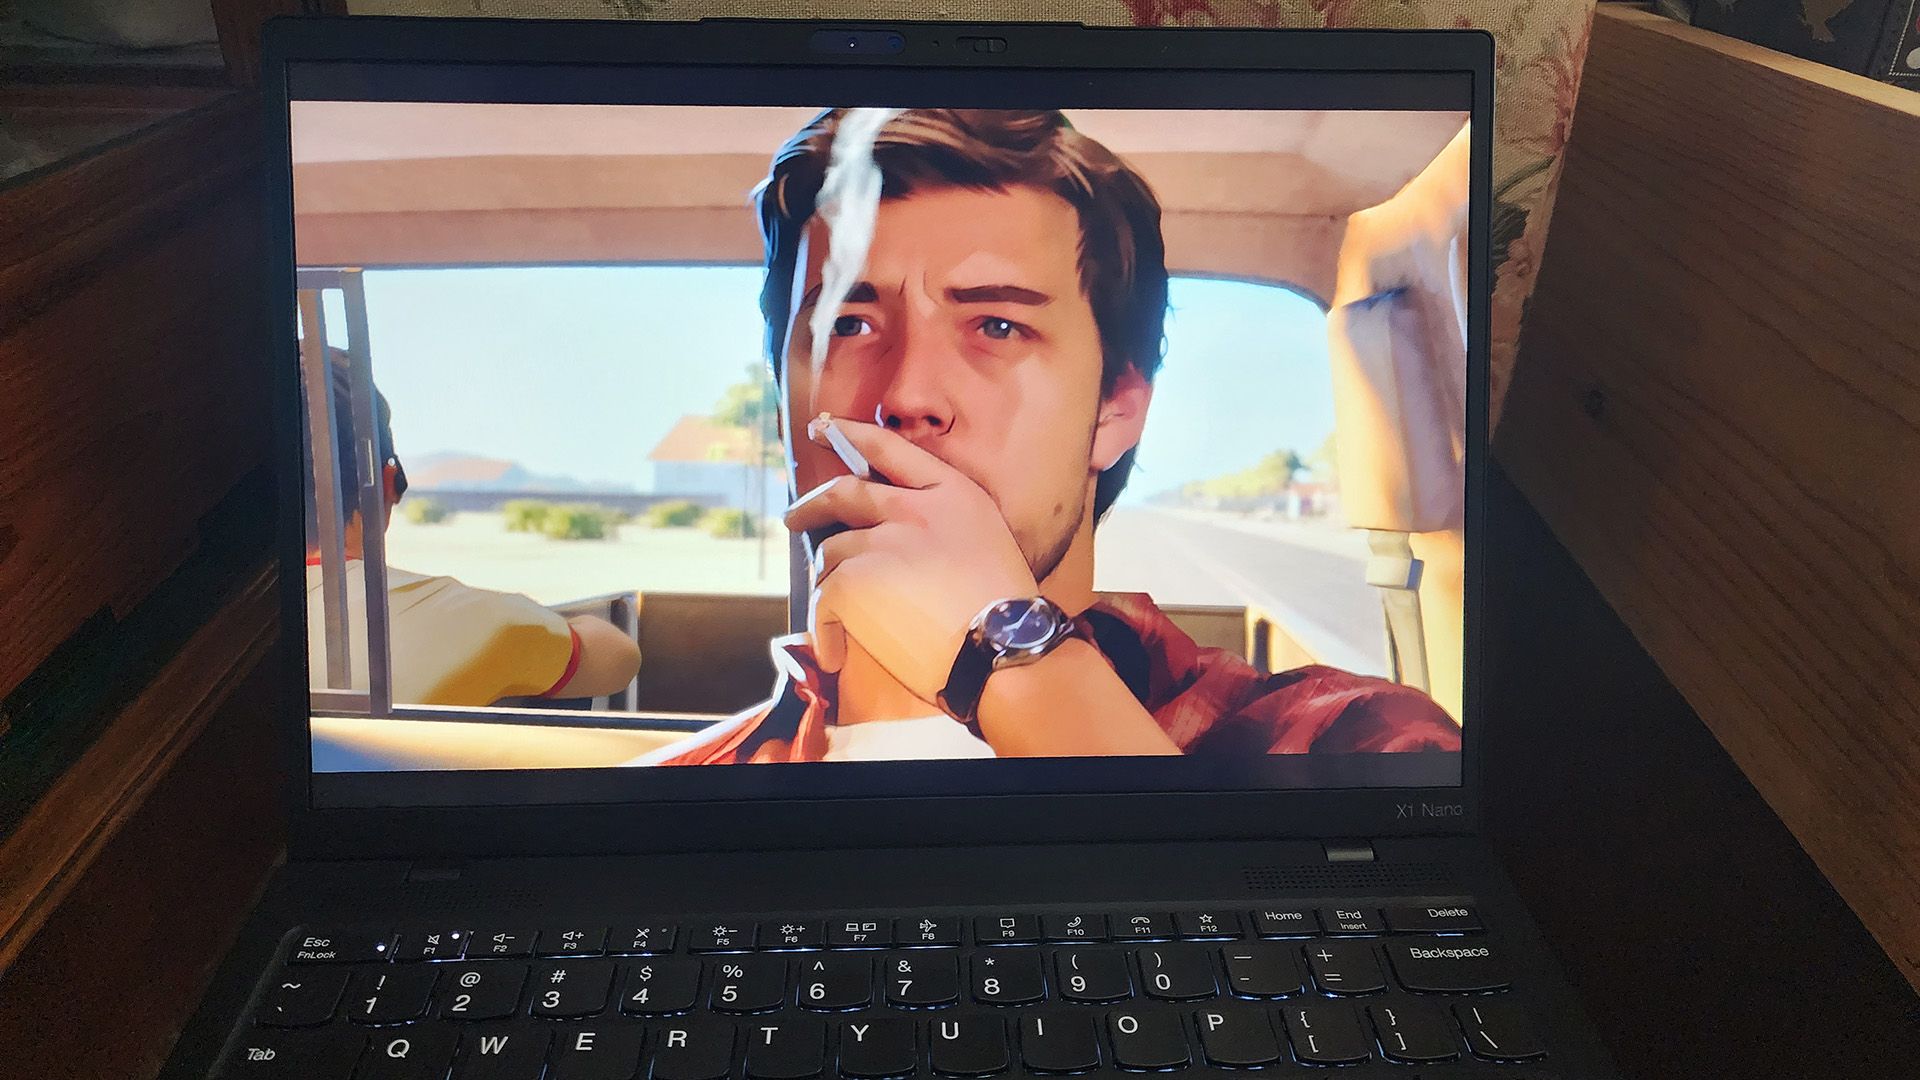 The Lenovo ThinkPad X1 Nano Gen 3 laptop playing a scene with a smoking man from the game 